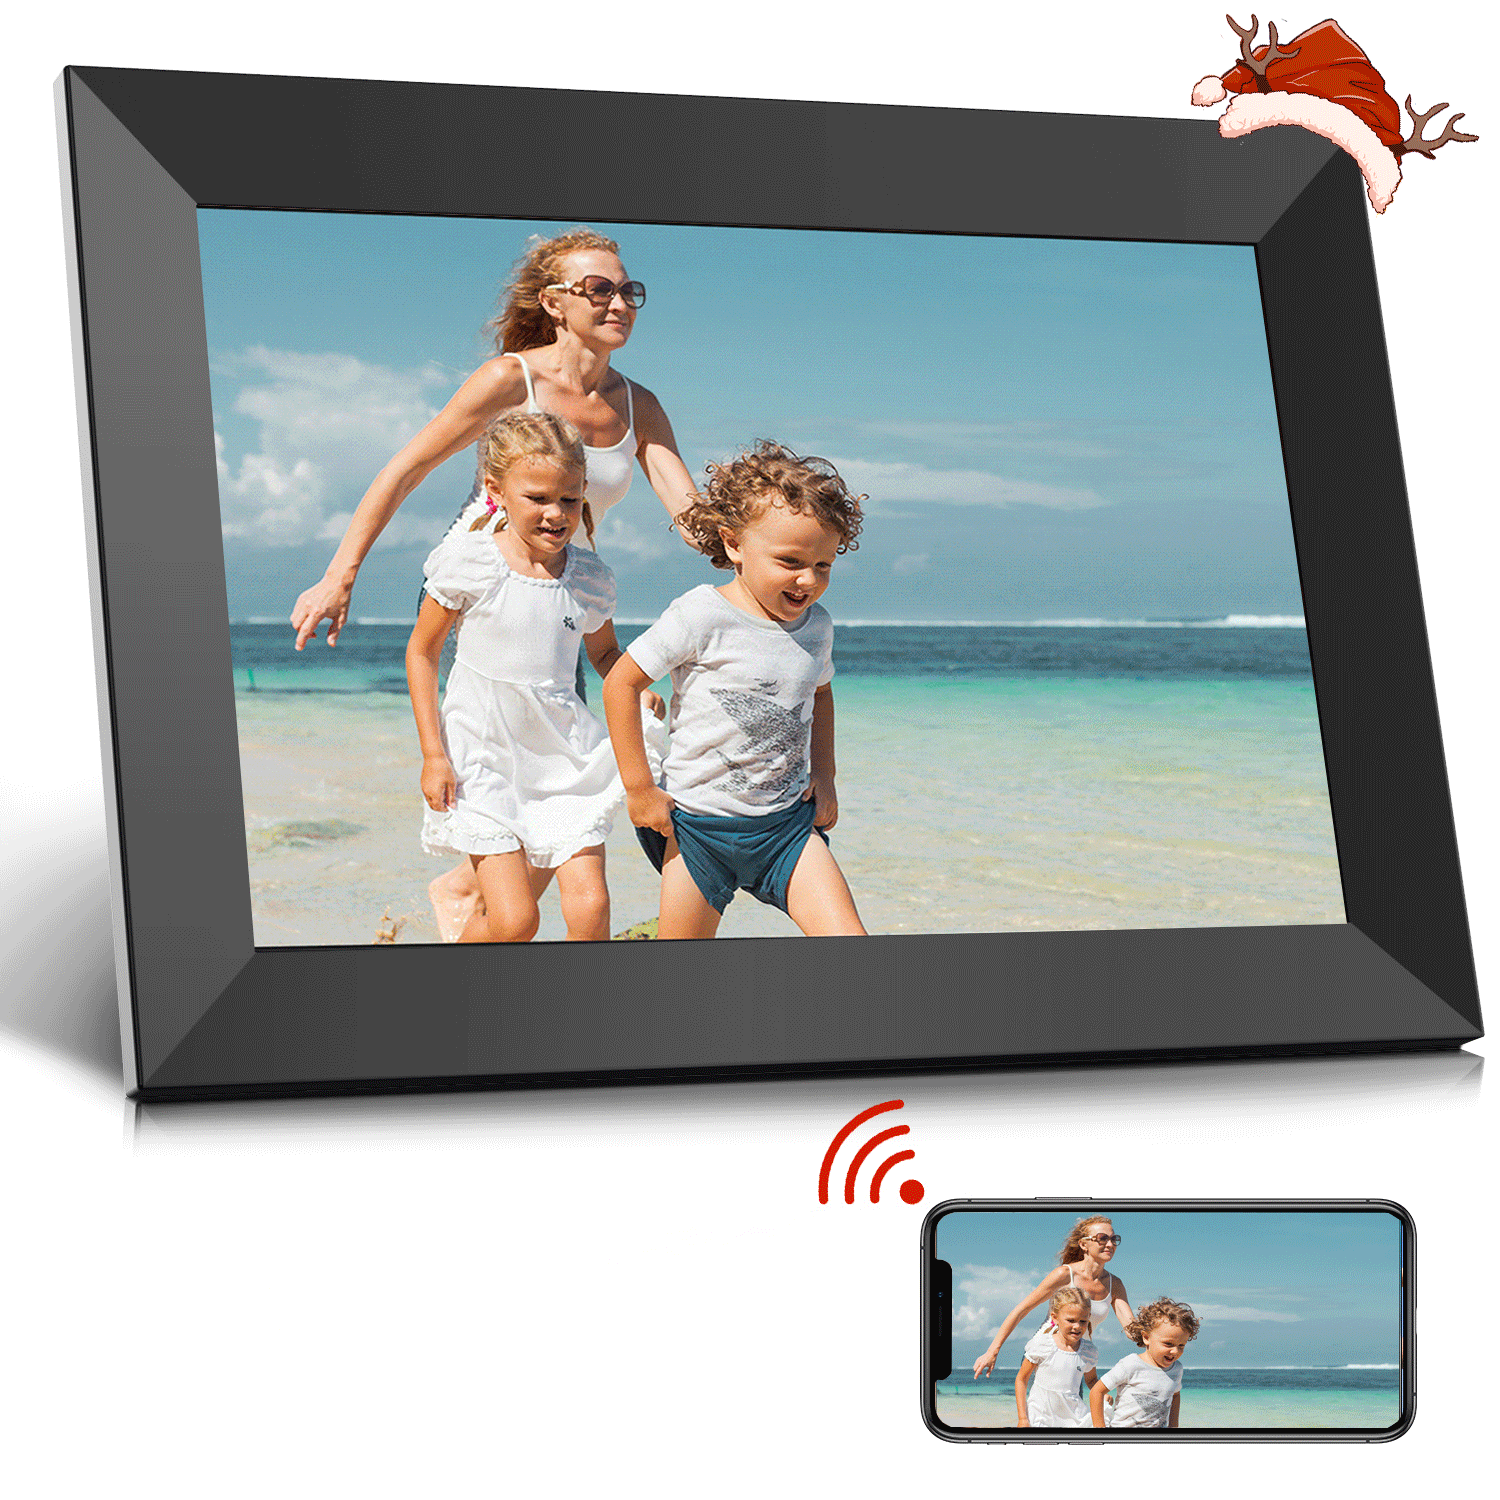 JEEMAK Digital Photo Frame WiFi  frameo 10.1" IPS Touch Screen Smart Cloud Picture Frame 16GB Built-in Storage Auto-Rotate - image 1 of 9